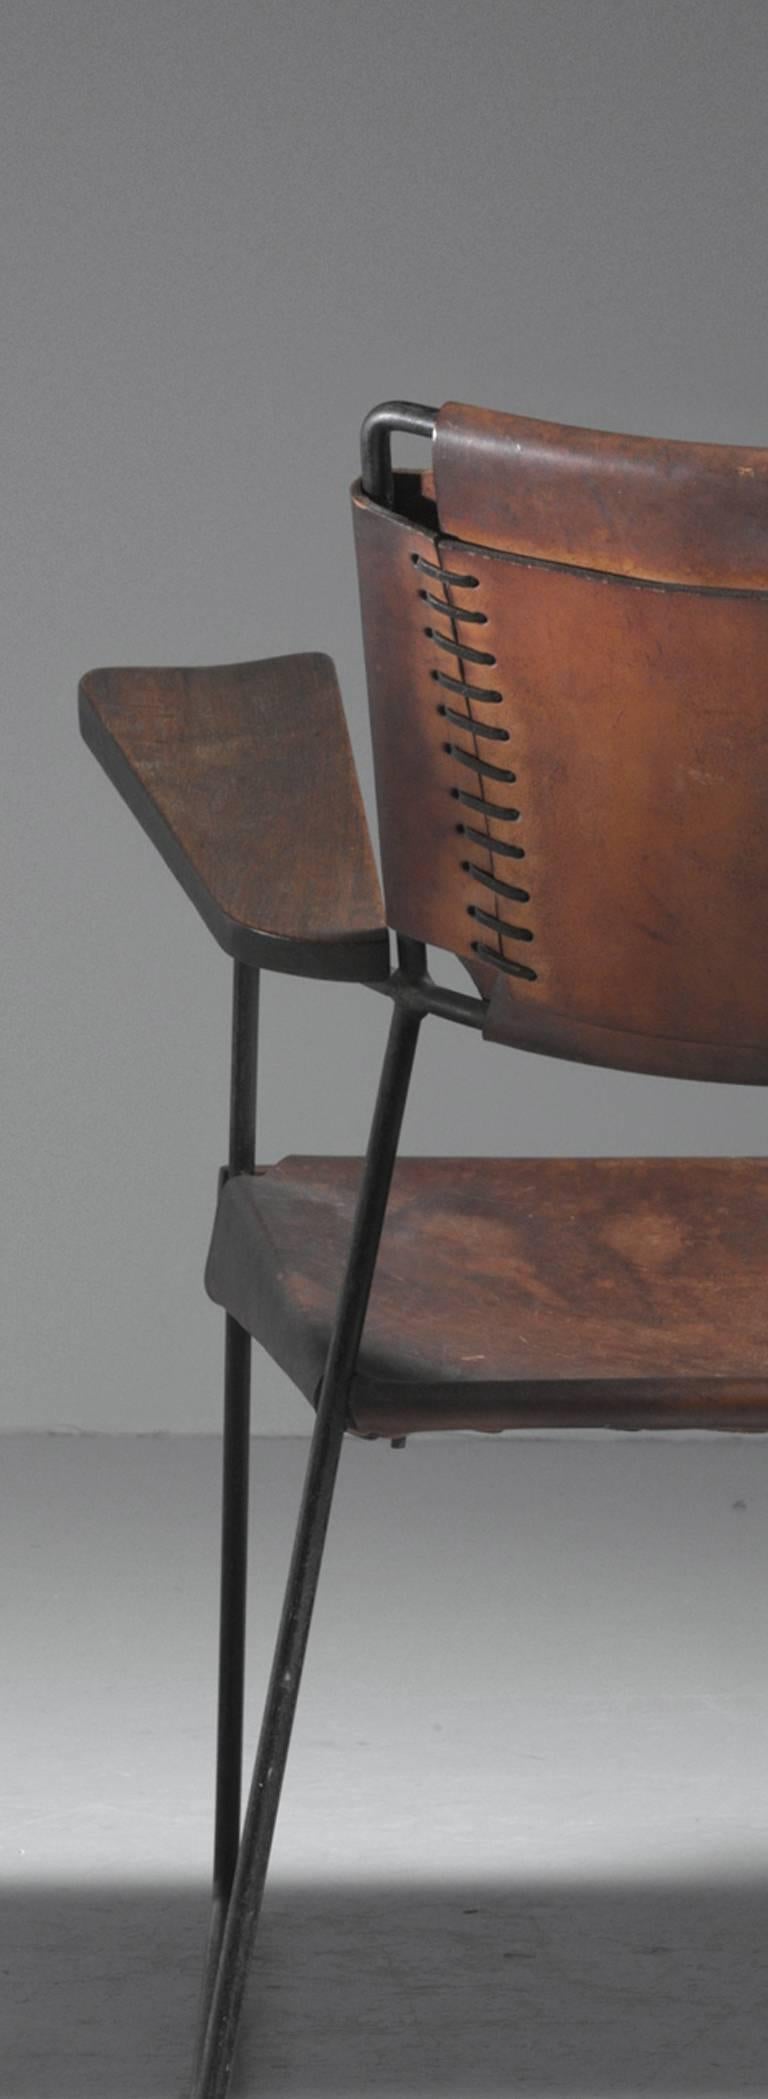 Rare Studio Furniture Chair with Heavy Saddle Leather, American, 1950s For Sale 2